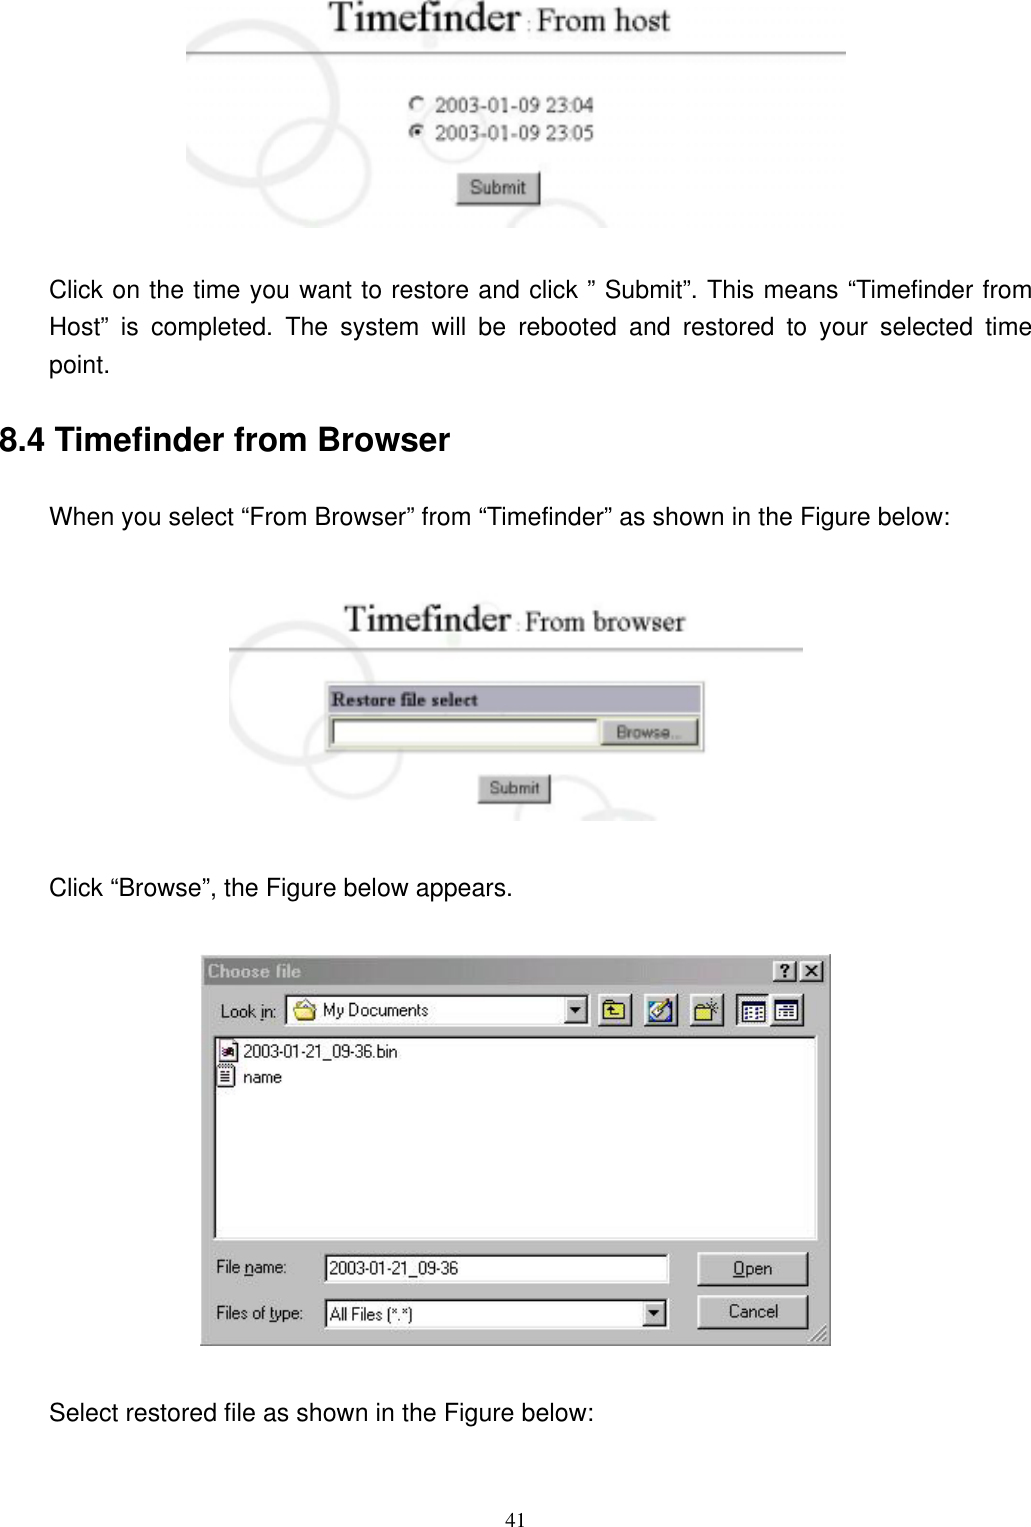  41  Click on the time you want to restore and click ” Submit”. This means “Timefinder from Host” is completed. The system will be rebooted and restored to your selected time point.  8.4 Timefinder from Browser When you select “From Browser” from “Timefinder” as shown in the Figure below:      Click “Browse”, the Figure below appears.      Select restored file as shown in the Figure below:    